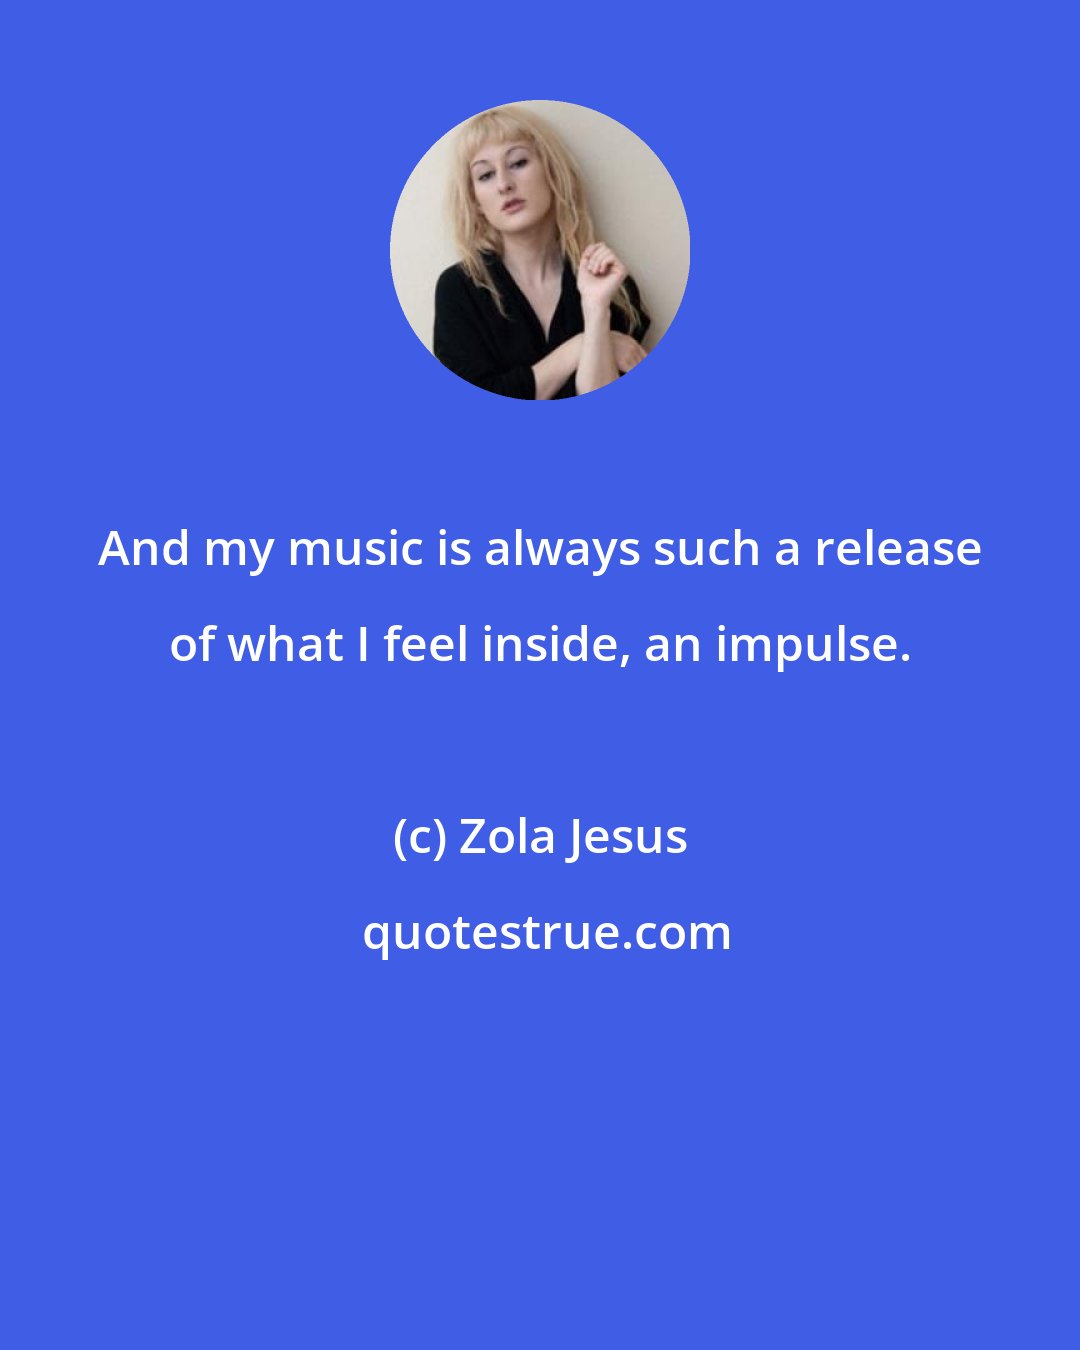 Zola Jesus: And my music is always such a release of what I feel inside, an impulse.